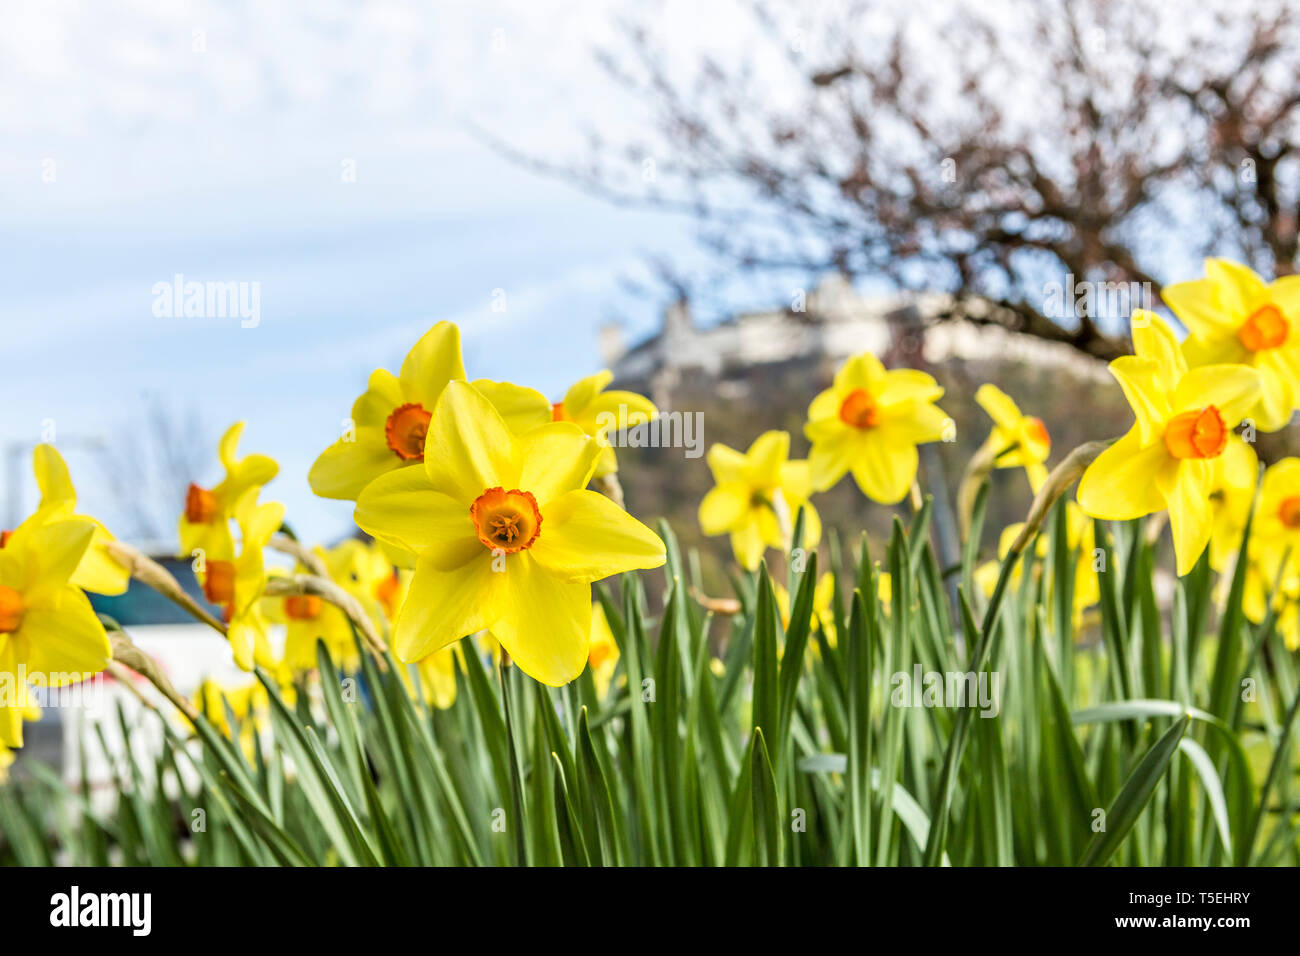 Daffodil flowers in spring Stock Photo